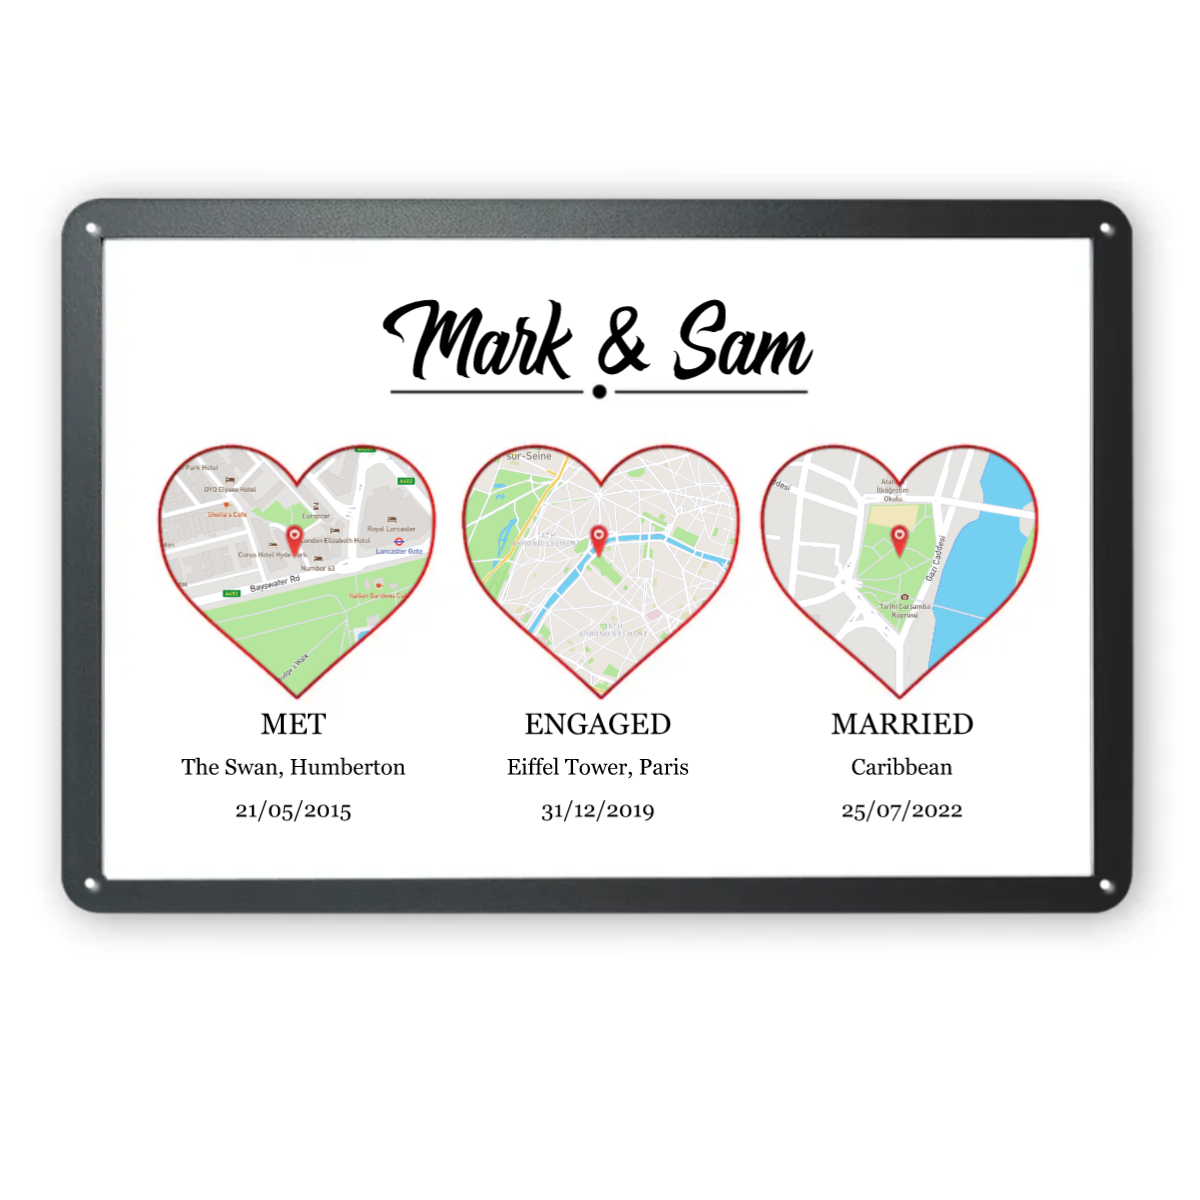 Met Engaged Married Wedding Gift Personalized Metal Signs